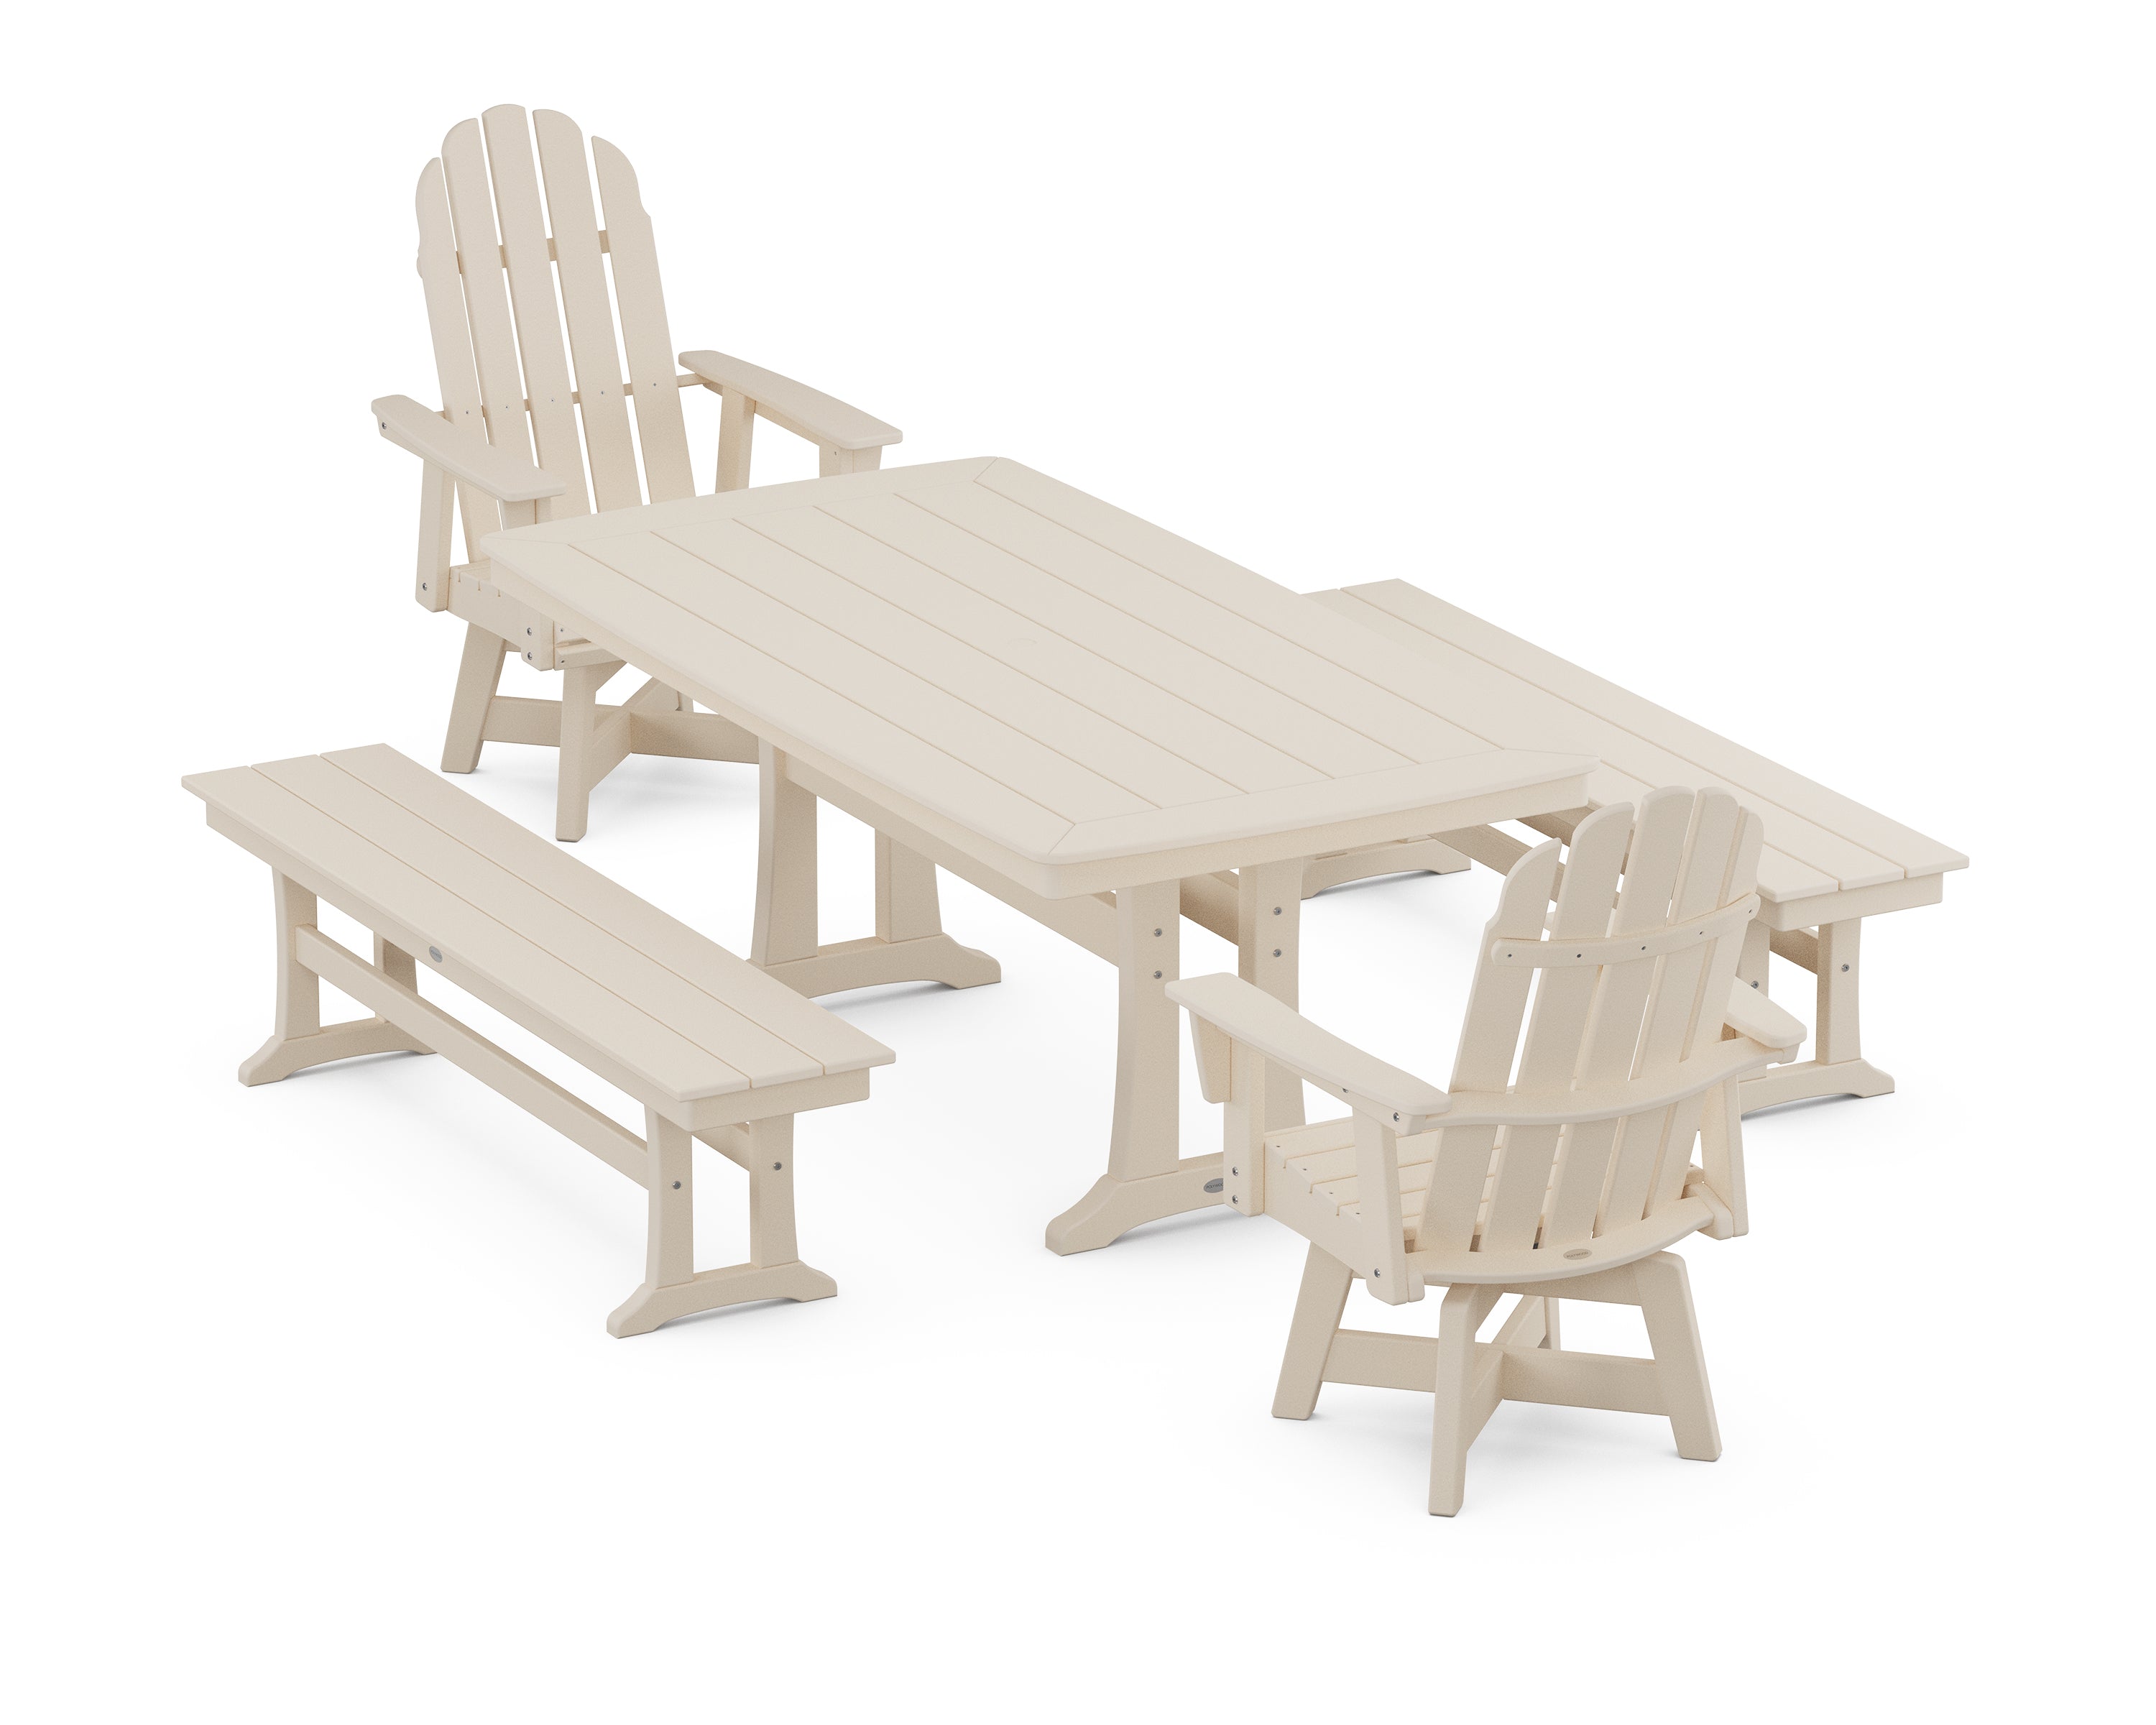 POLYWOOD® Vineyard Adirondack Swivel Chair 5-Piece Dining Set with Trestle Legs and Benches in Sand